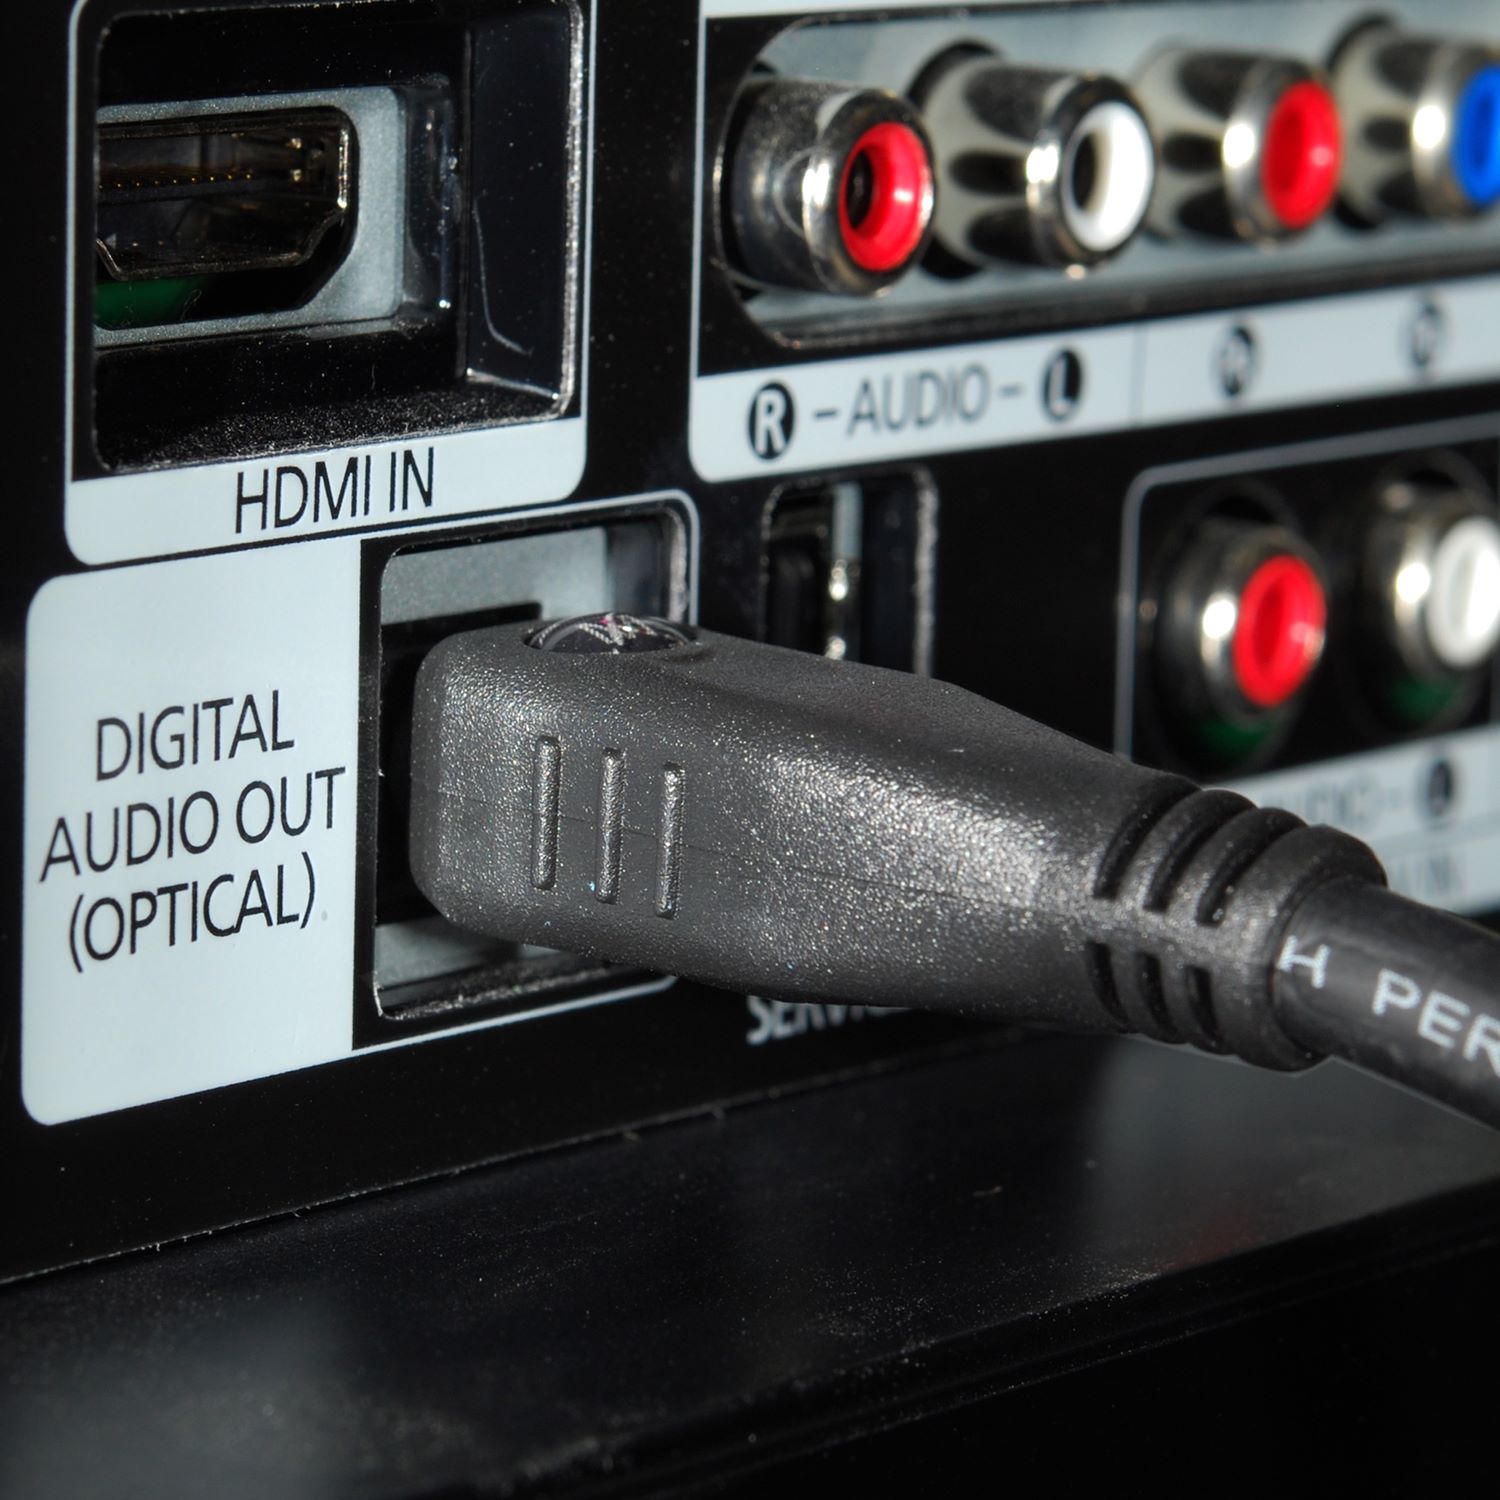 What Is Digital Audio Out Optical